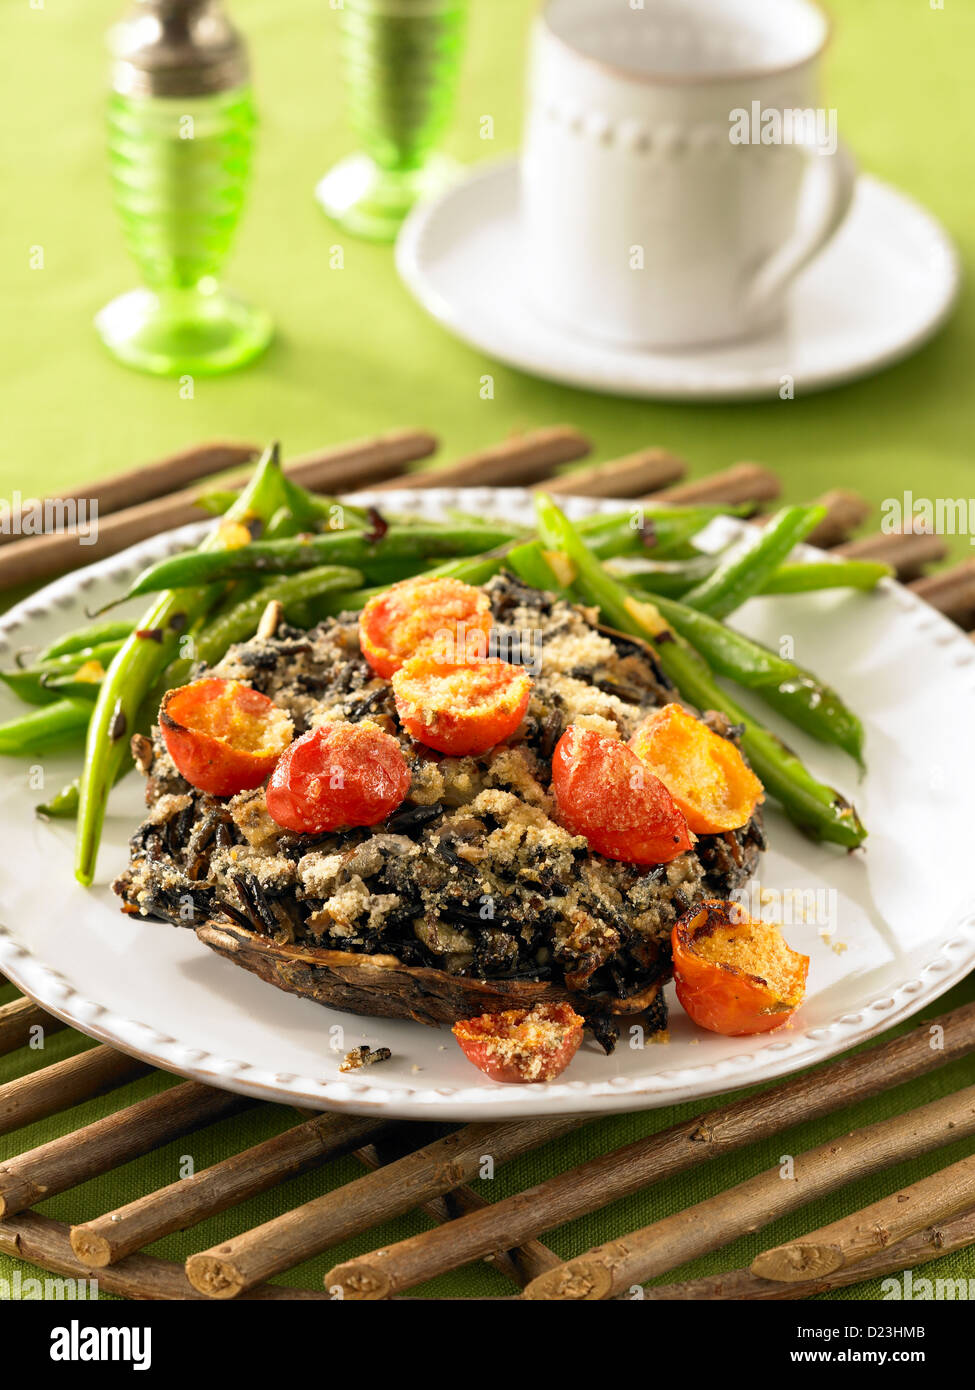 Stuffed mushrooms with grilled tomatoes and green beans Stock Photo